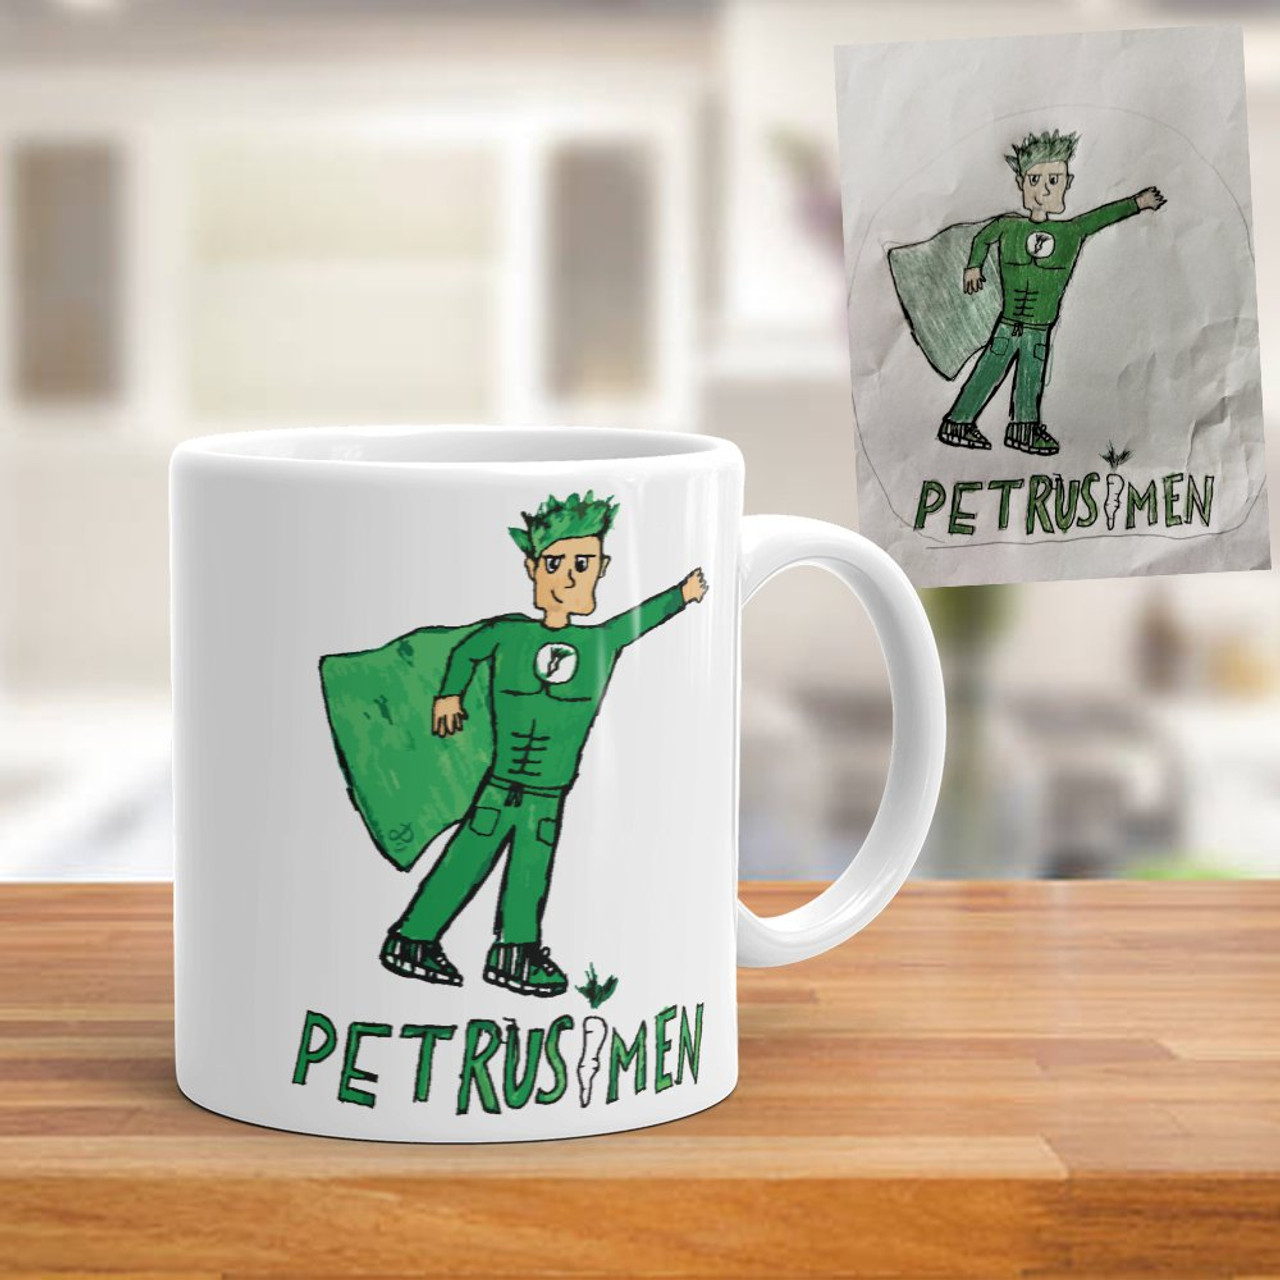 Personalized Mugs With Kids Drawings